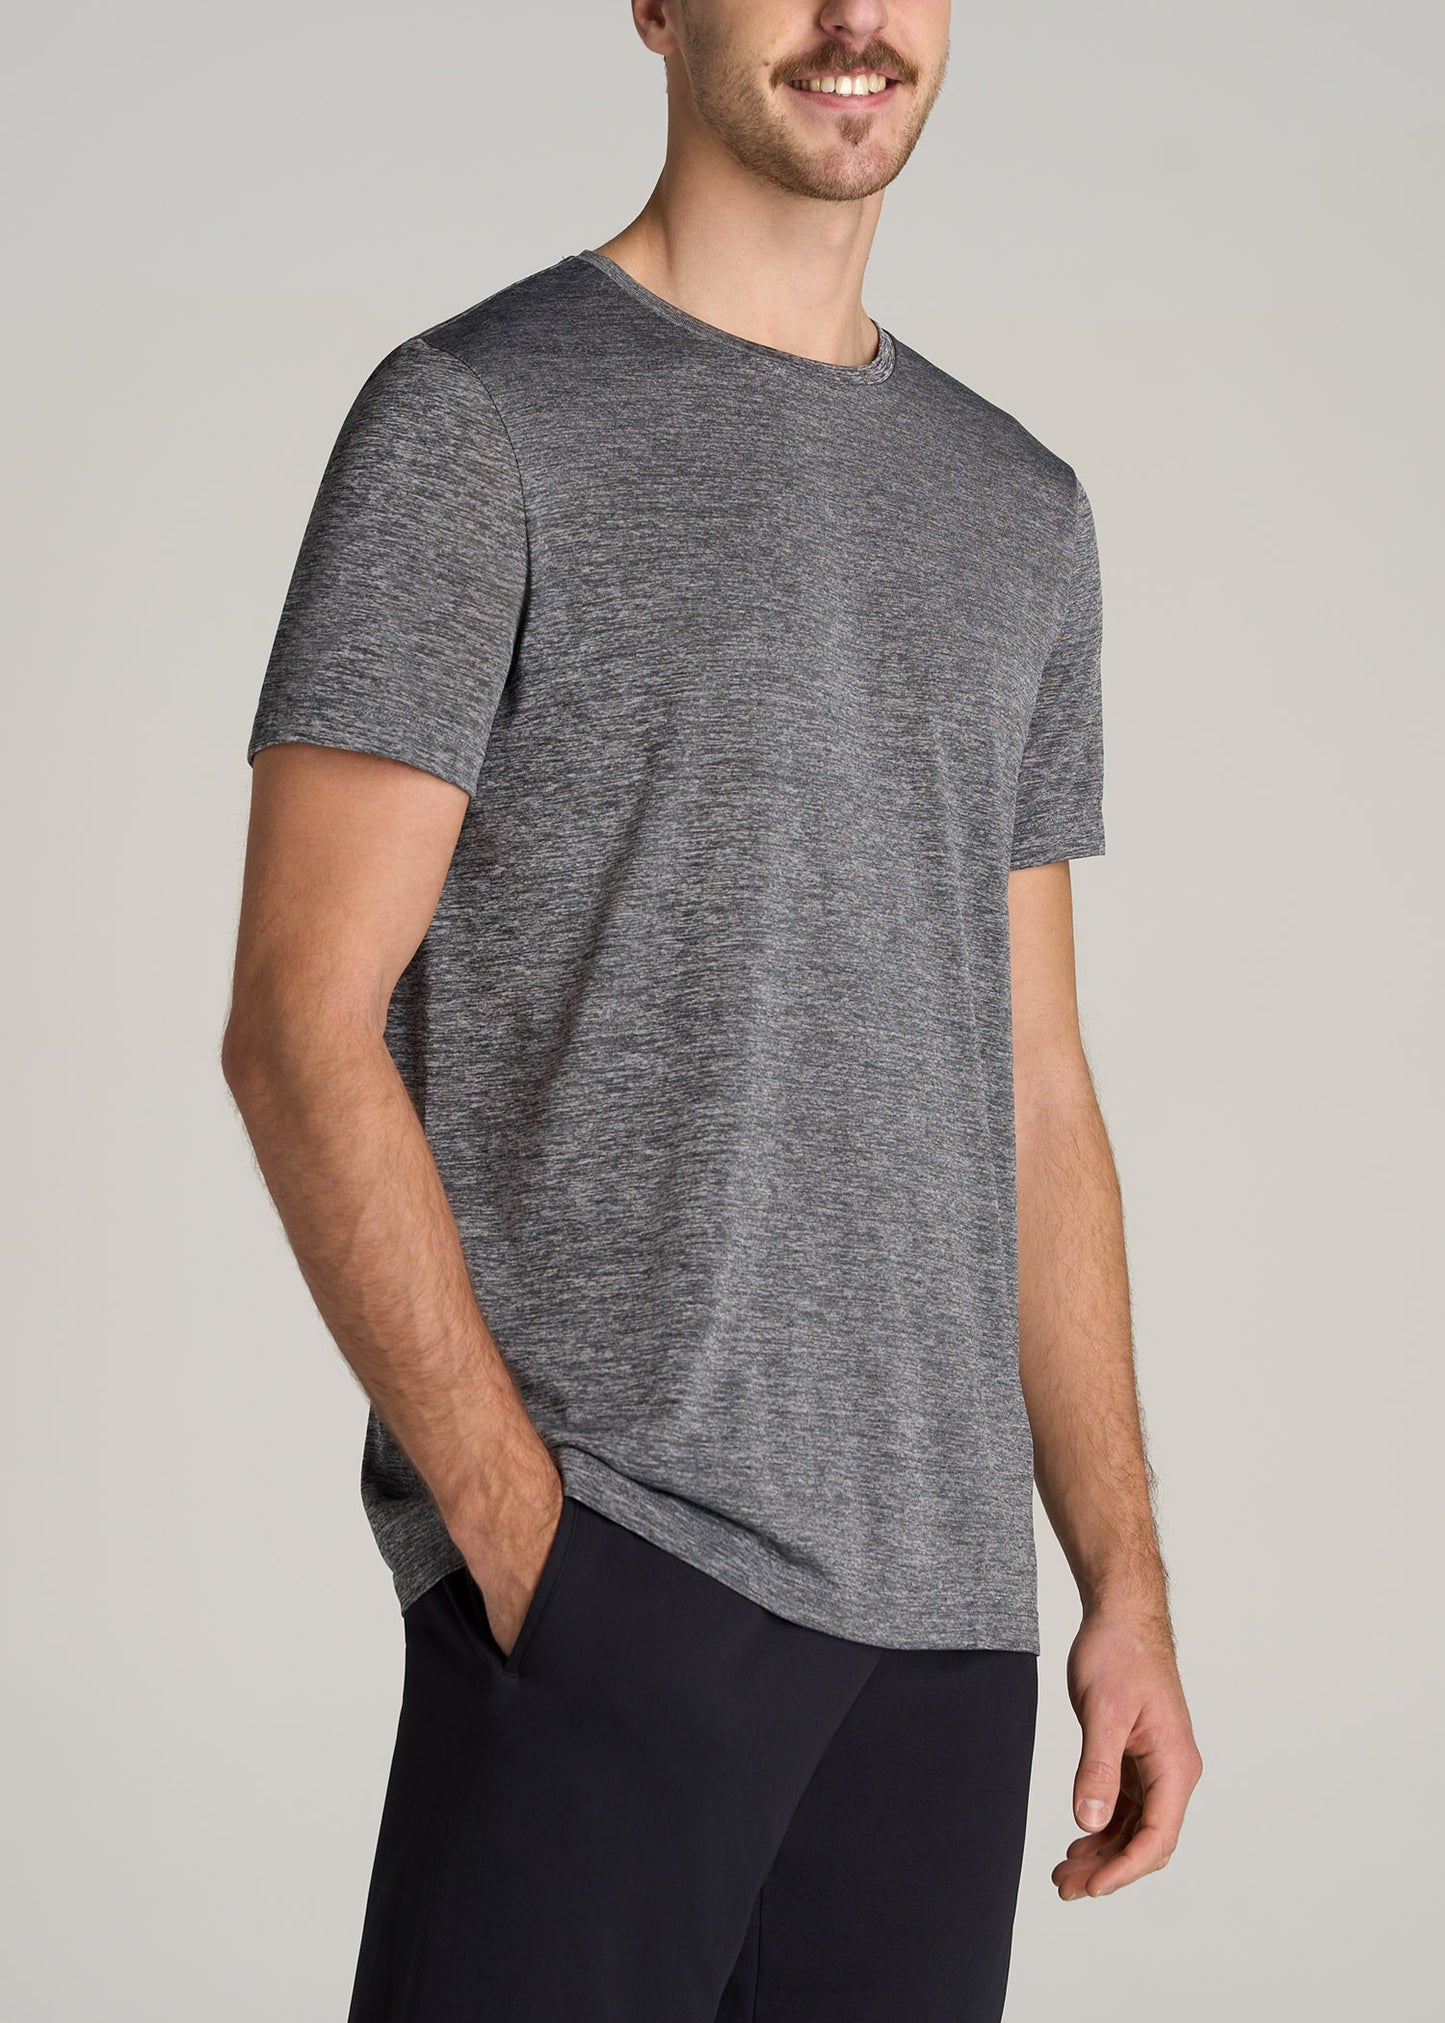       American-Tall-Men-Performance-MODERN-FIT-Athletic-Jersey-Tee-Grey-Mix-side